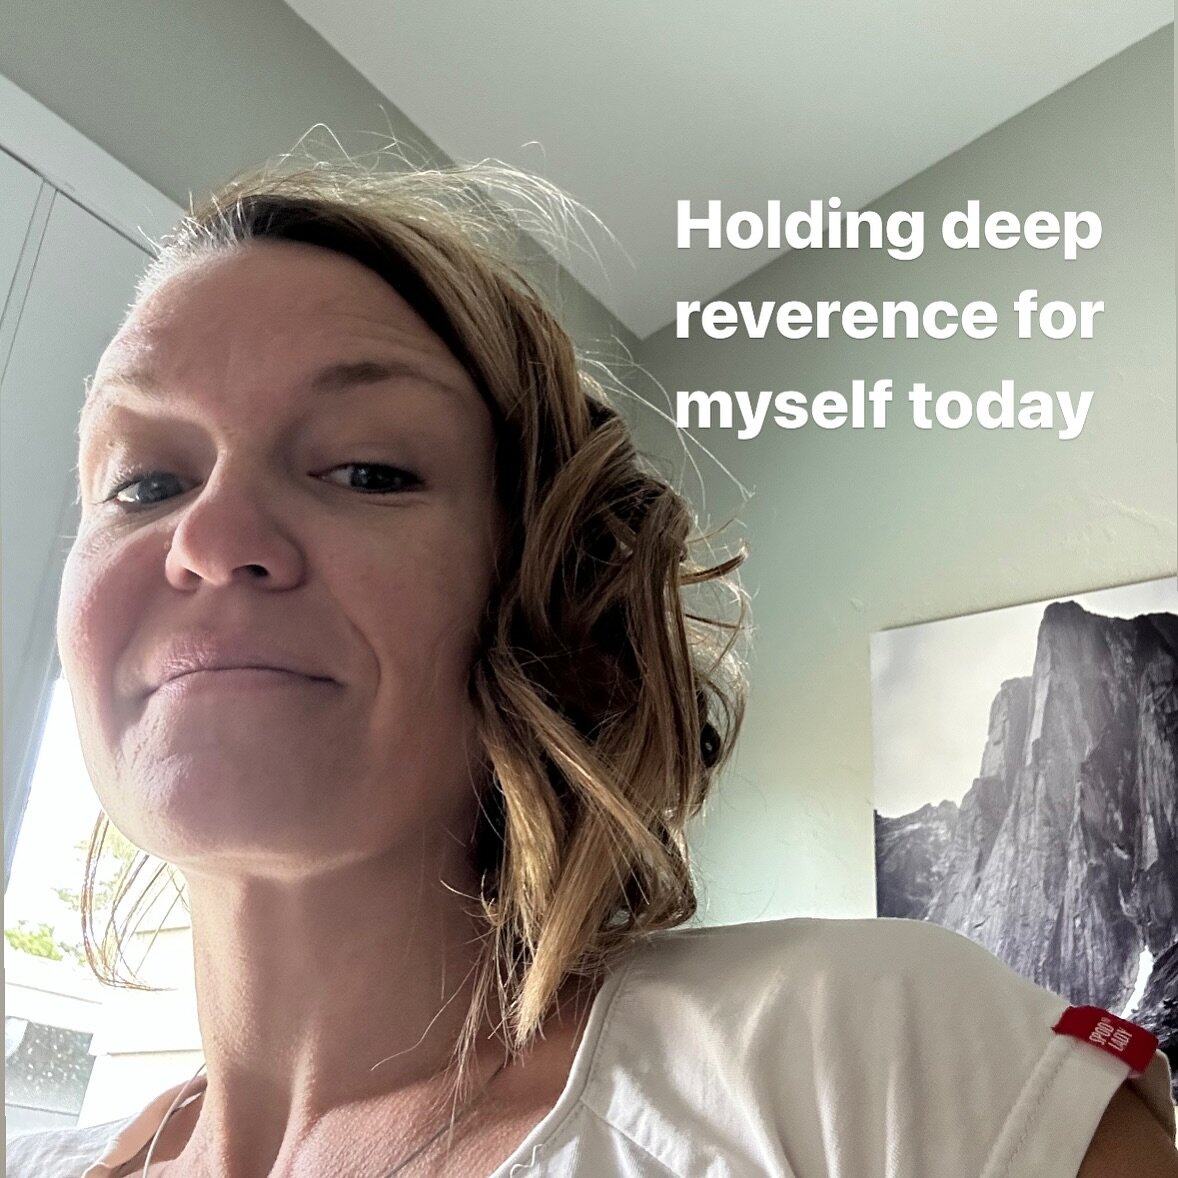 As some difficult news rolled in today, I stayed present. I felt my disappointment and discouragement. The I asked myself &ldquo;what would be the highest act of self love right now?&rdquo;
To go into the feelings and meet them with presence and love